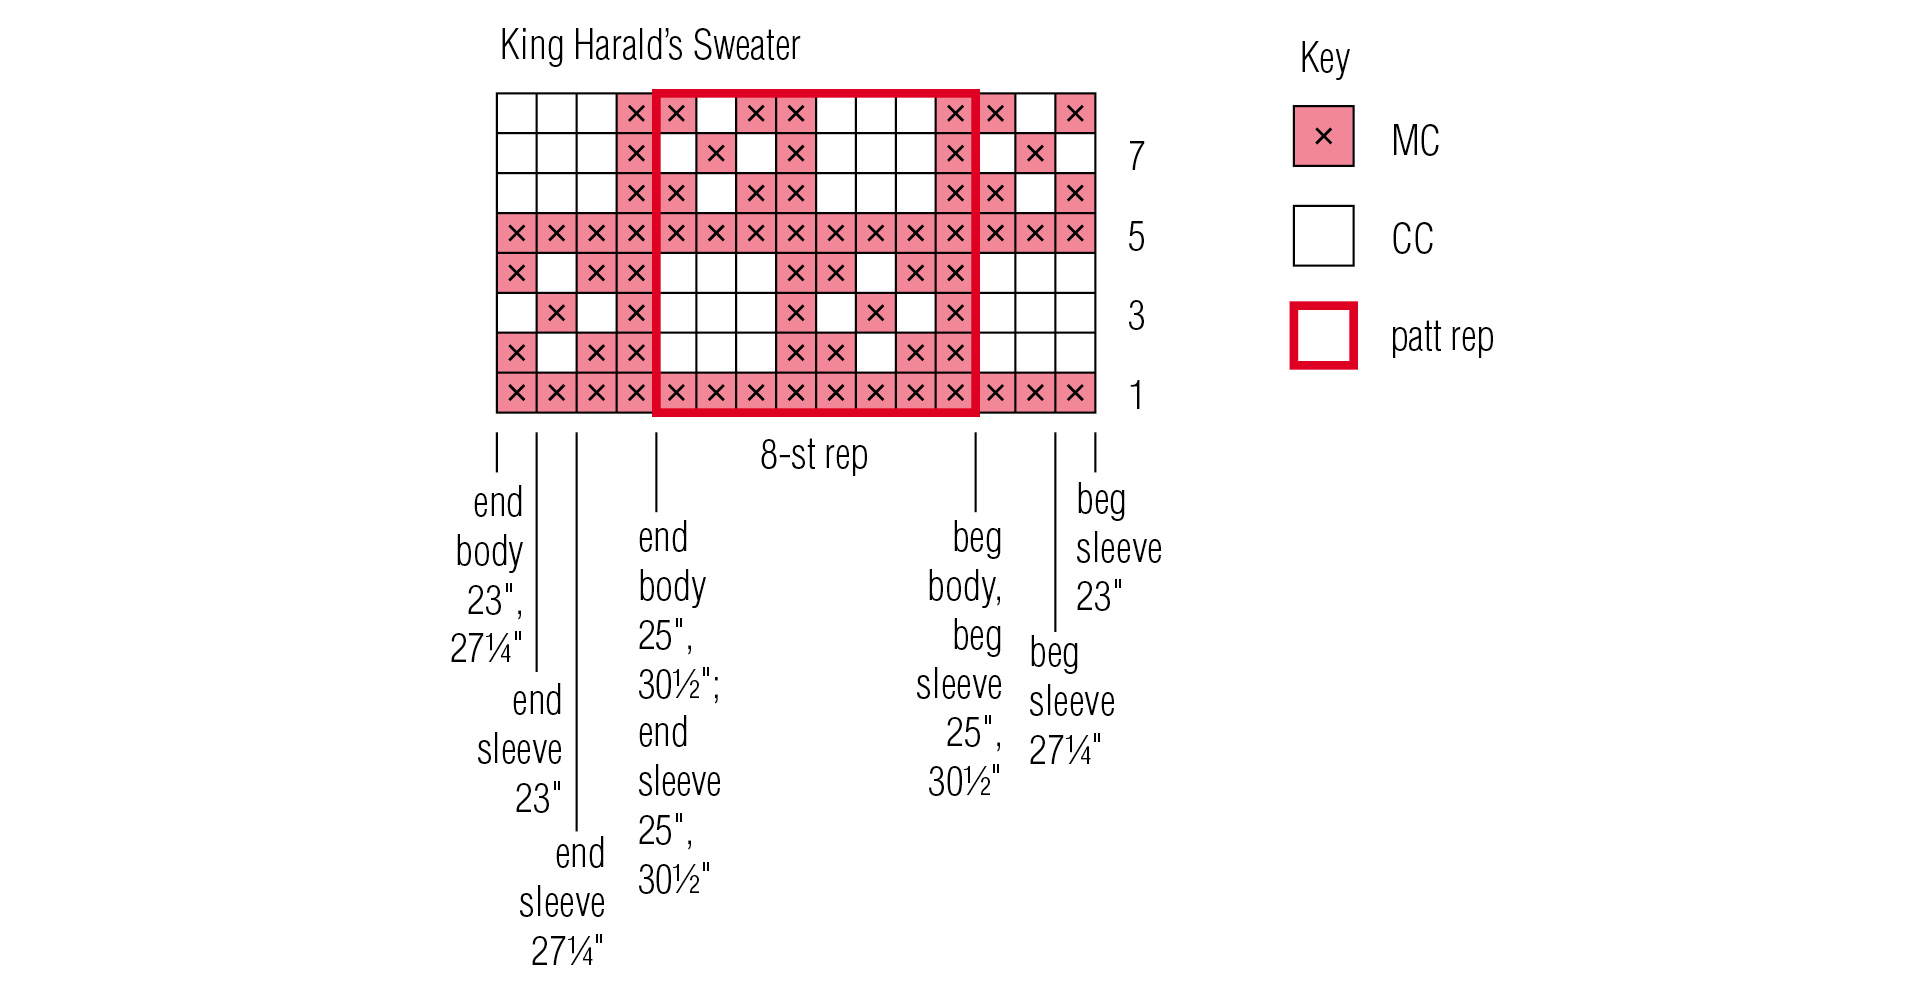 The-Crown-Prince’s-Sweater-3-chart-key